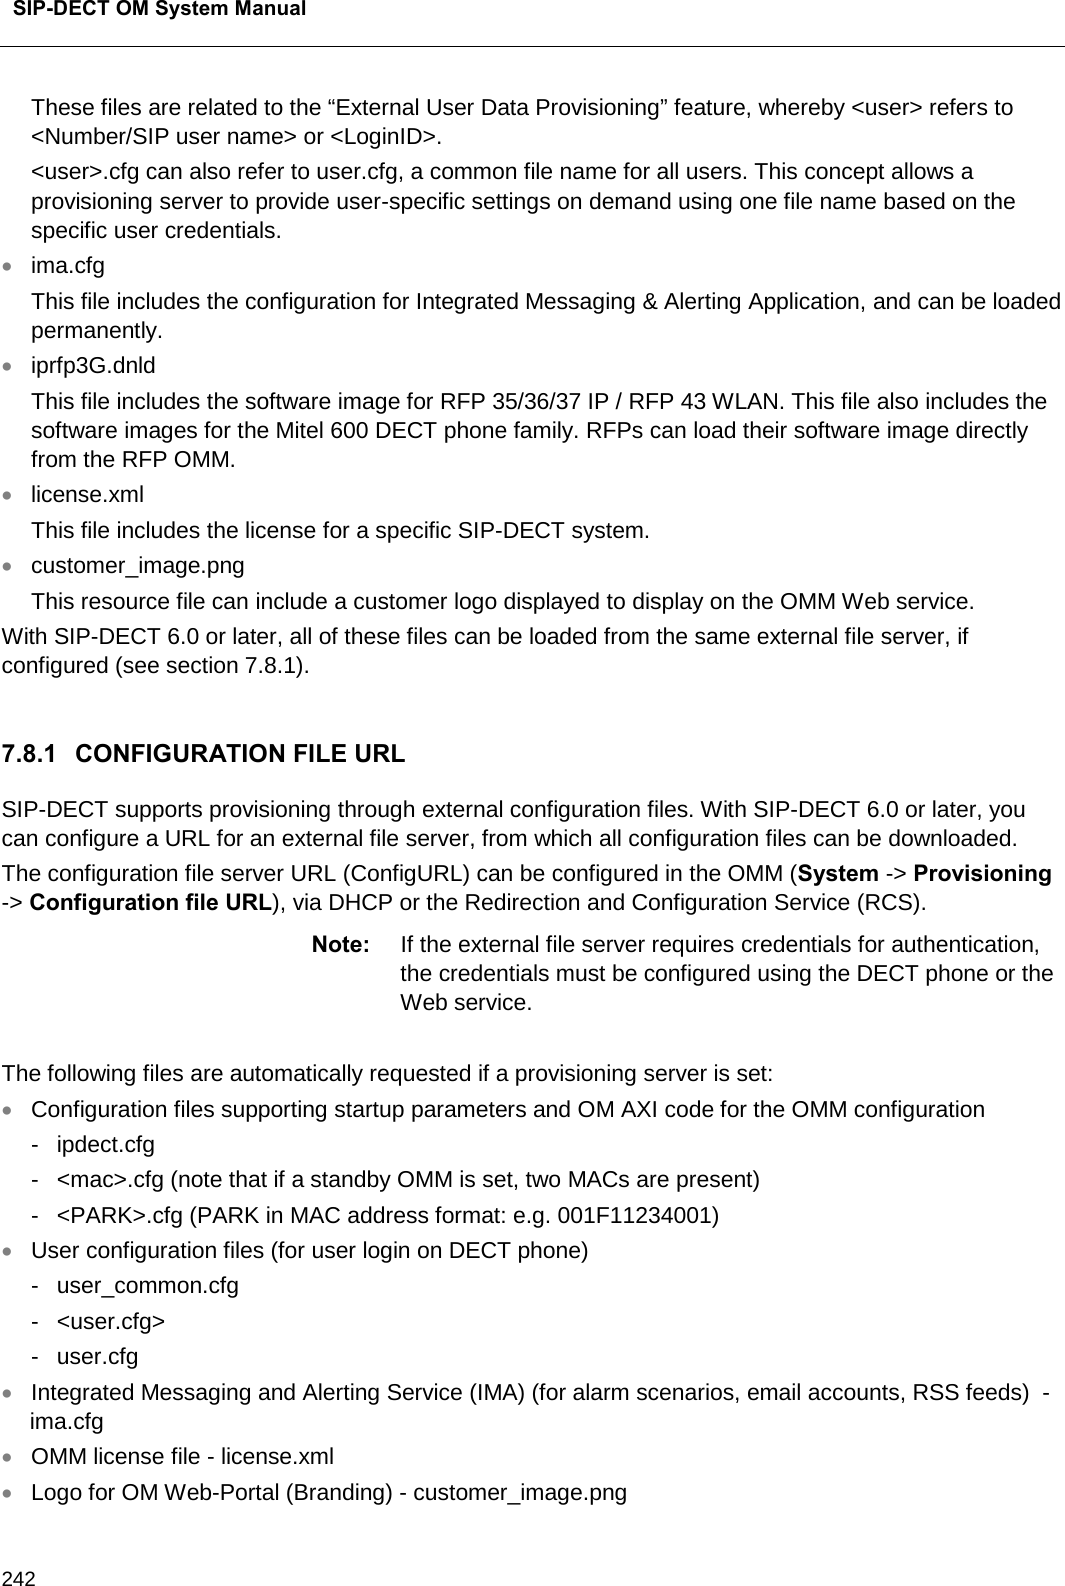  SIP-DECT OM System Manual    242 These files are related to the “External User Data Provisioning” feature, whereby &lt;user&gt; refers to &lt;Number/SIP user name&gt; or &lt;LoginID&gt;. &lt;user&gt;.cfg can also refer to user.cfg, a common file name for all users. This concept allows a provisioning server to provide user-specific settings on demand using one file name based on the specific user credentials. • ima.cfg This file includes the configuration for Integrated Messaging &amp; Alerting Application, and can be loaded permanently.  • iprfp3G.dnld  This file includes the software image for RFP 35/36/37 IP / RFP 43 WLAN. This file also includes the software images for the Mitel 600 DECT phone family. RFPs can load their software image directly from the RFP OMM. • license.xml This file includes the license for a specific SIP-DECT system. • customer_image.png This resource file can include a customer logo displayed to display on the OMM Web service. With SIP-DECT 6.0 or later, all of these files can be loaded from the same external file server, if configured (see section 7.8.1).  7.8.1 CONFIGURATION FILE URL SIP-DECT supports provisioning through external configuration files. With SIP-DECT 6.0 or later, you can configure a URL for an external file server, from which all configuration files can be downloaded.   The configuration file server URL (ConfigURL) can be configured in the OMM (System -&gt; Provisioning -&gt; Configuration file URL), via DHCP or the Redirection and Configuration Service (RCS). Note: If the external file server requires credentials for authentication, the credentials must be configured using the DECT phone or the Web service.  The following files are automatically requested if a provisioning server is set: • Configuration files supporting startup parameters and OM AXI code for the OMM configuration -  ipdect.cfg  -  &lt;mac&gt;.cfg (note that if a standby OMM is set, two MACs are present)  -  &lt;PARK&gt;.cfg (PARK in MAC address format: e.g. 001F11234001) • User configuration files (for user login on DECT phone) -  user_common.cfg  -  &lt;user.cfg&gt;  -  user.cfg • Integrated Messaging and Alerting Service (IMA) (for alarm scenarios, email accounts, RSS feeds)  - ima.cfg  • OMM license file - license.xml  • Logo for OM Web-Portal (Branding) - customer_image.png 